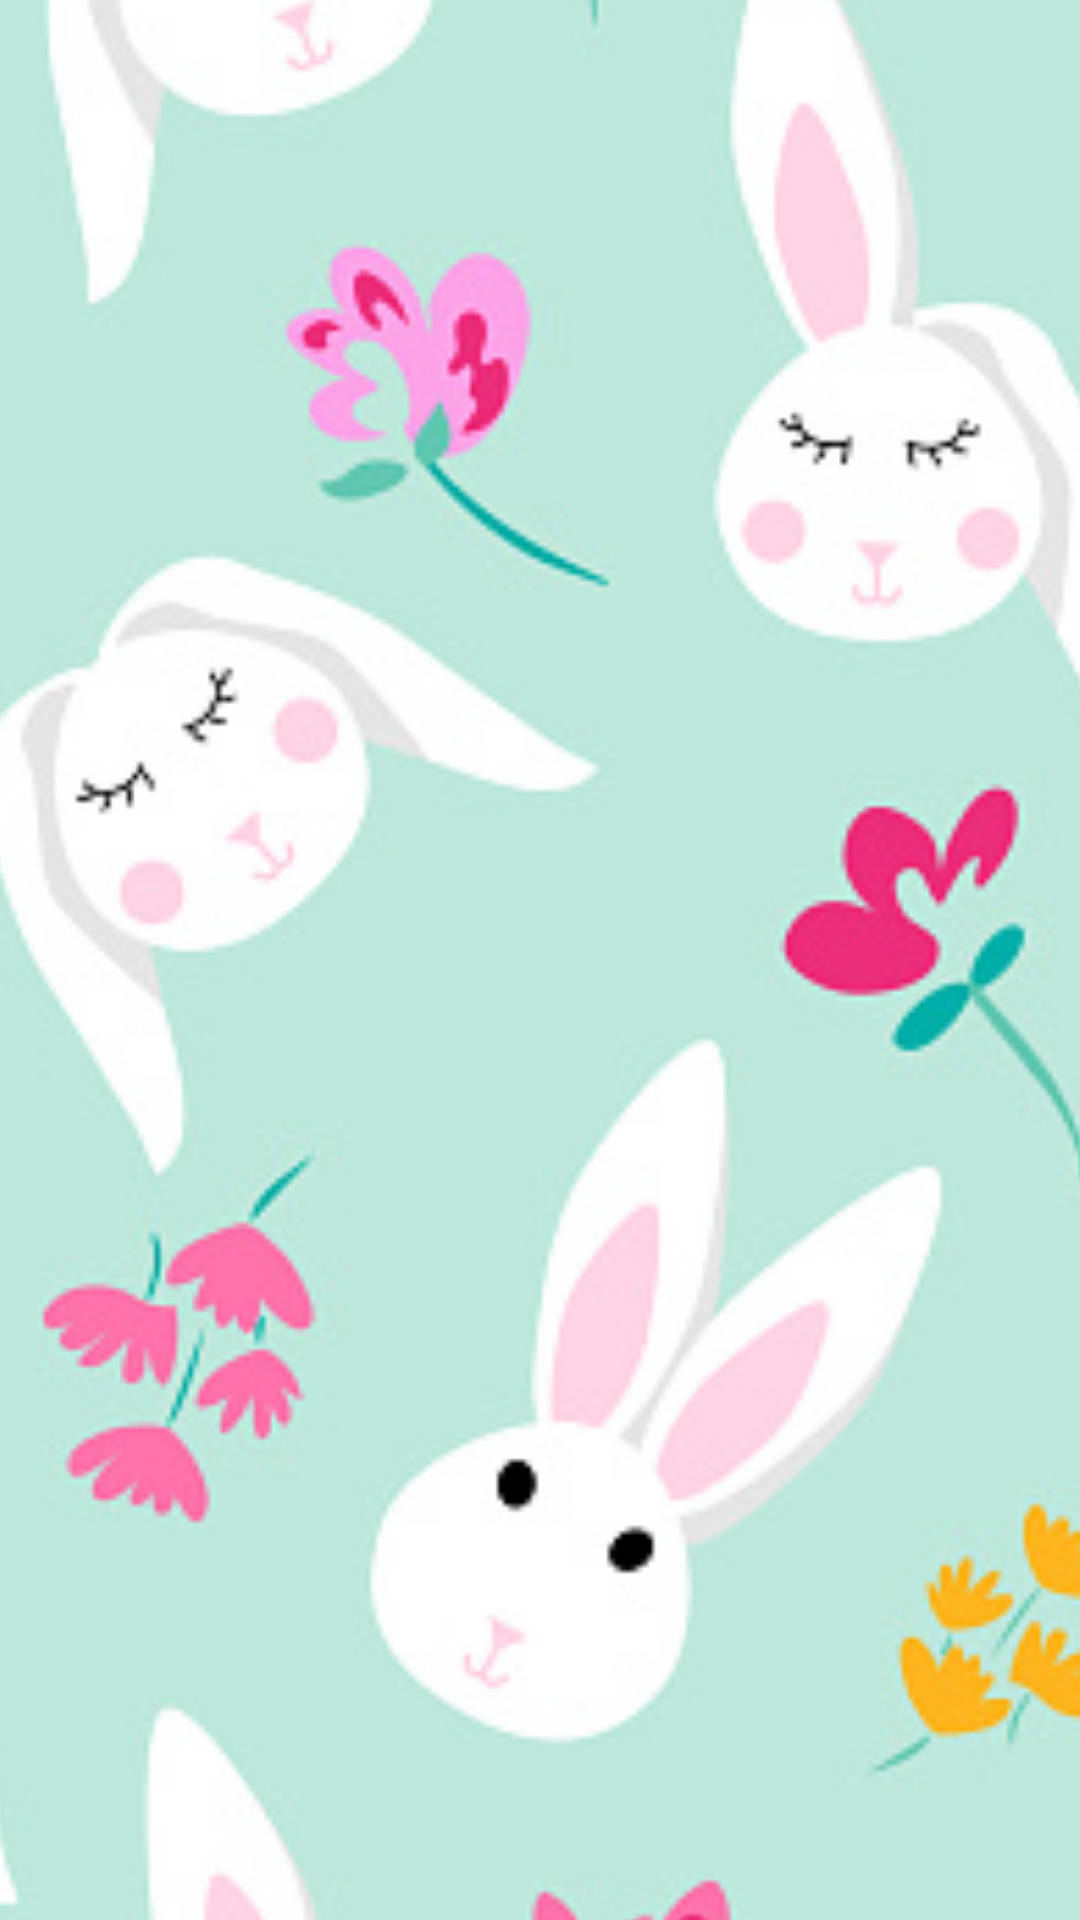 Flowers And White Rabbits